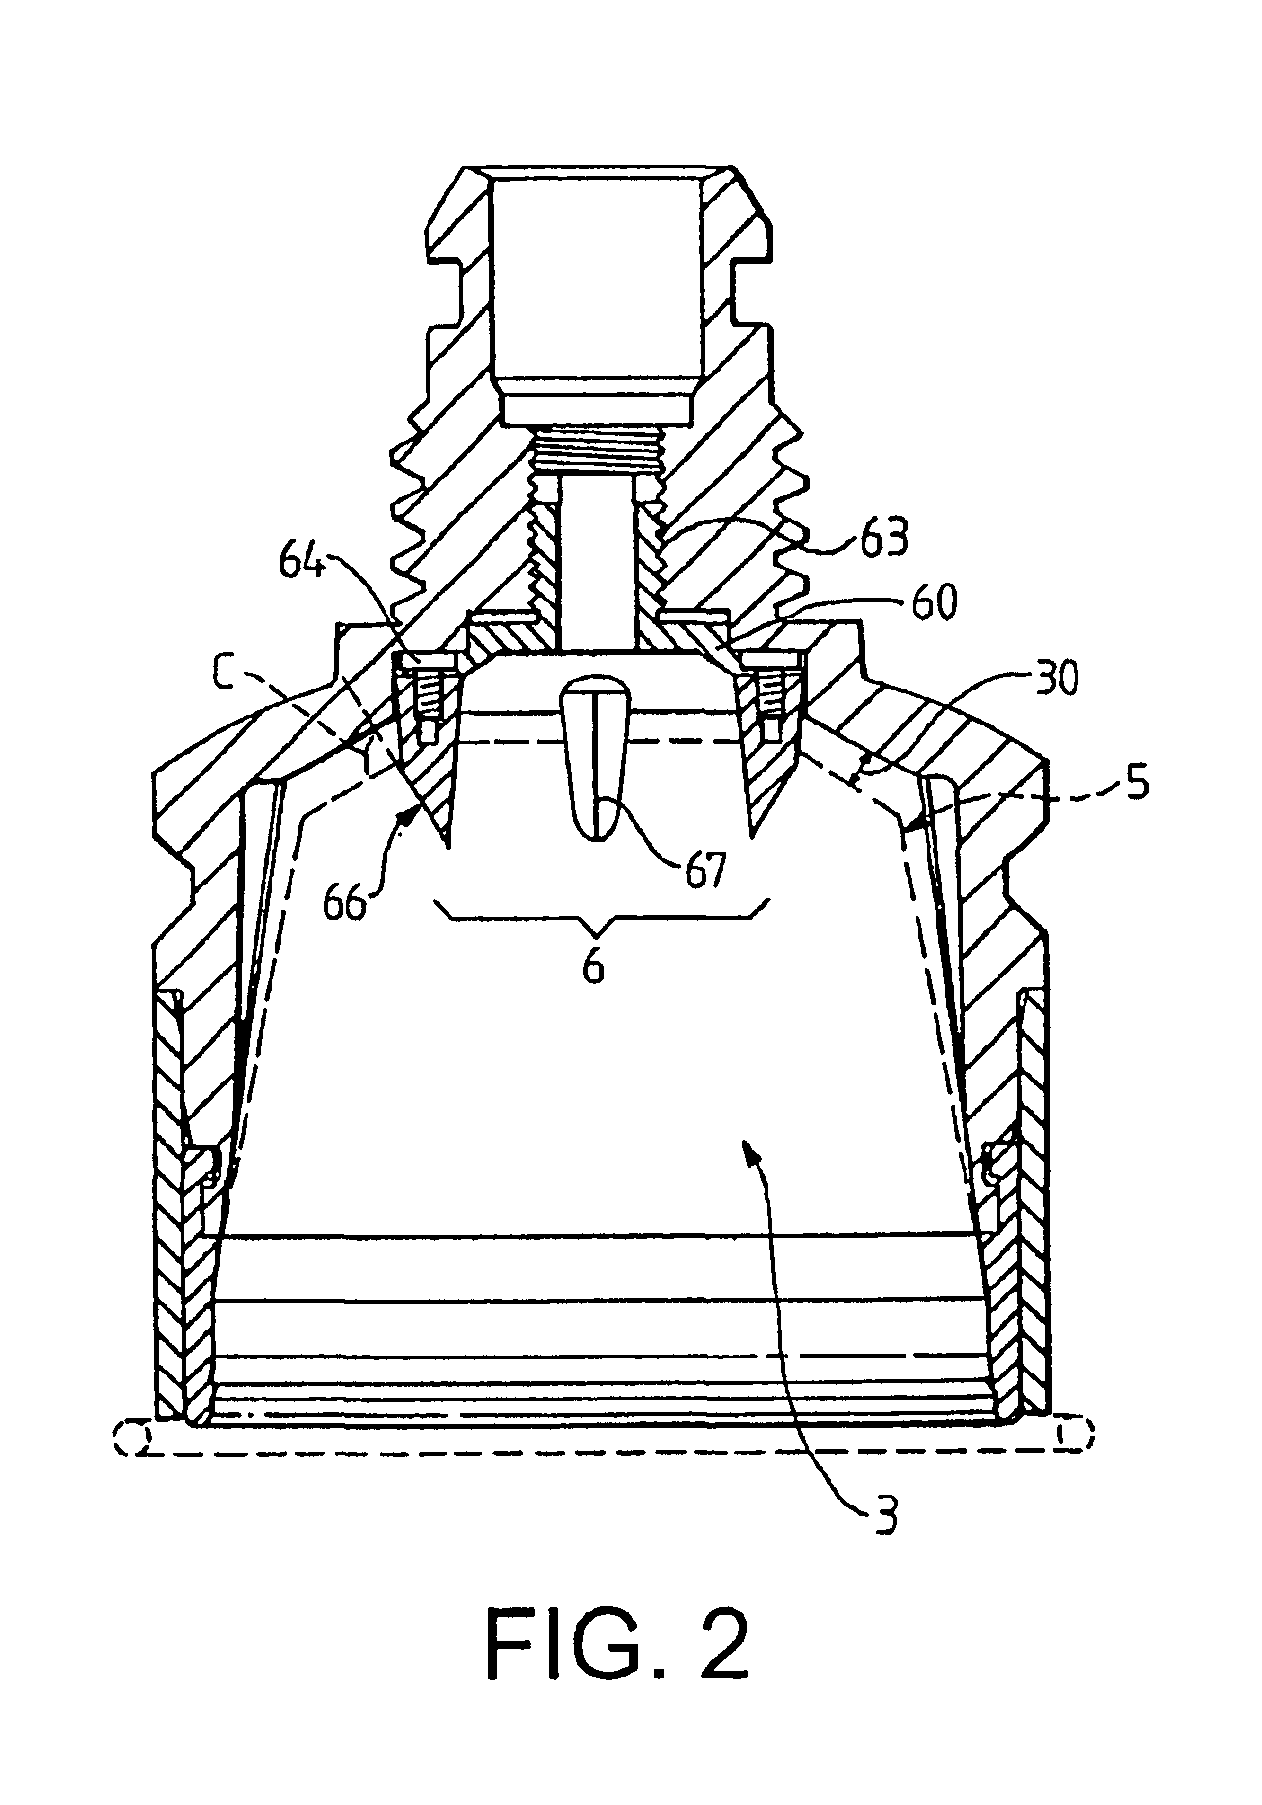 Device and method for improving the extraction of a food substance contained in a refill